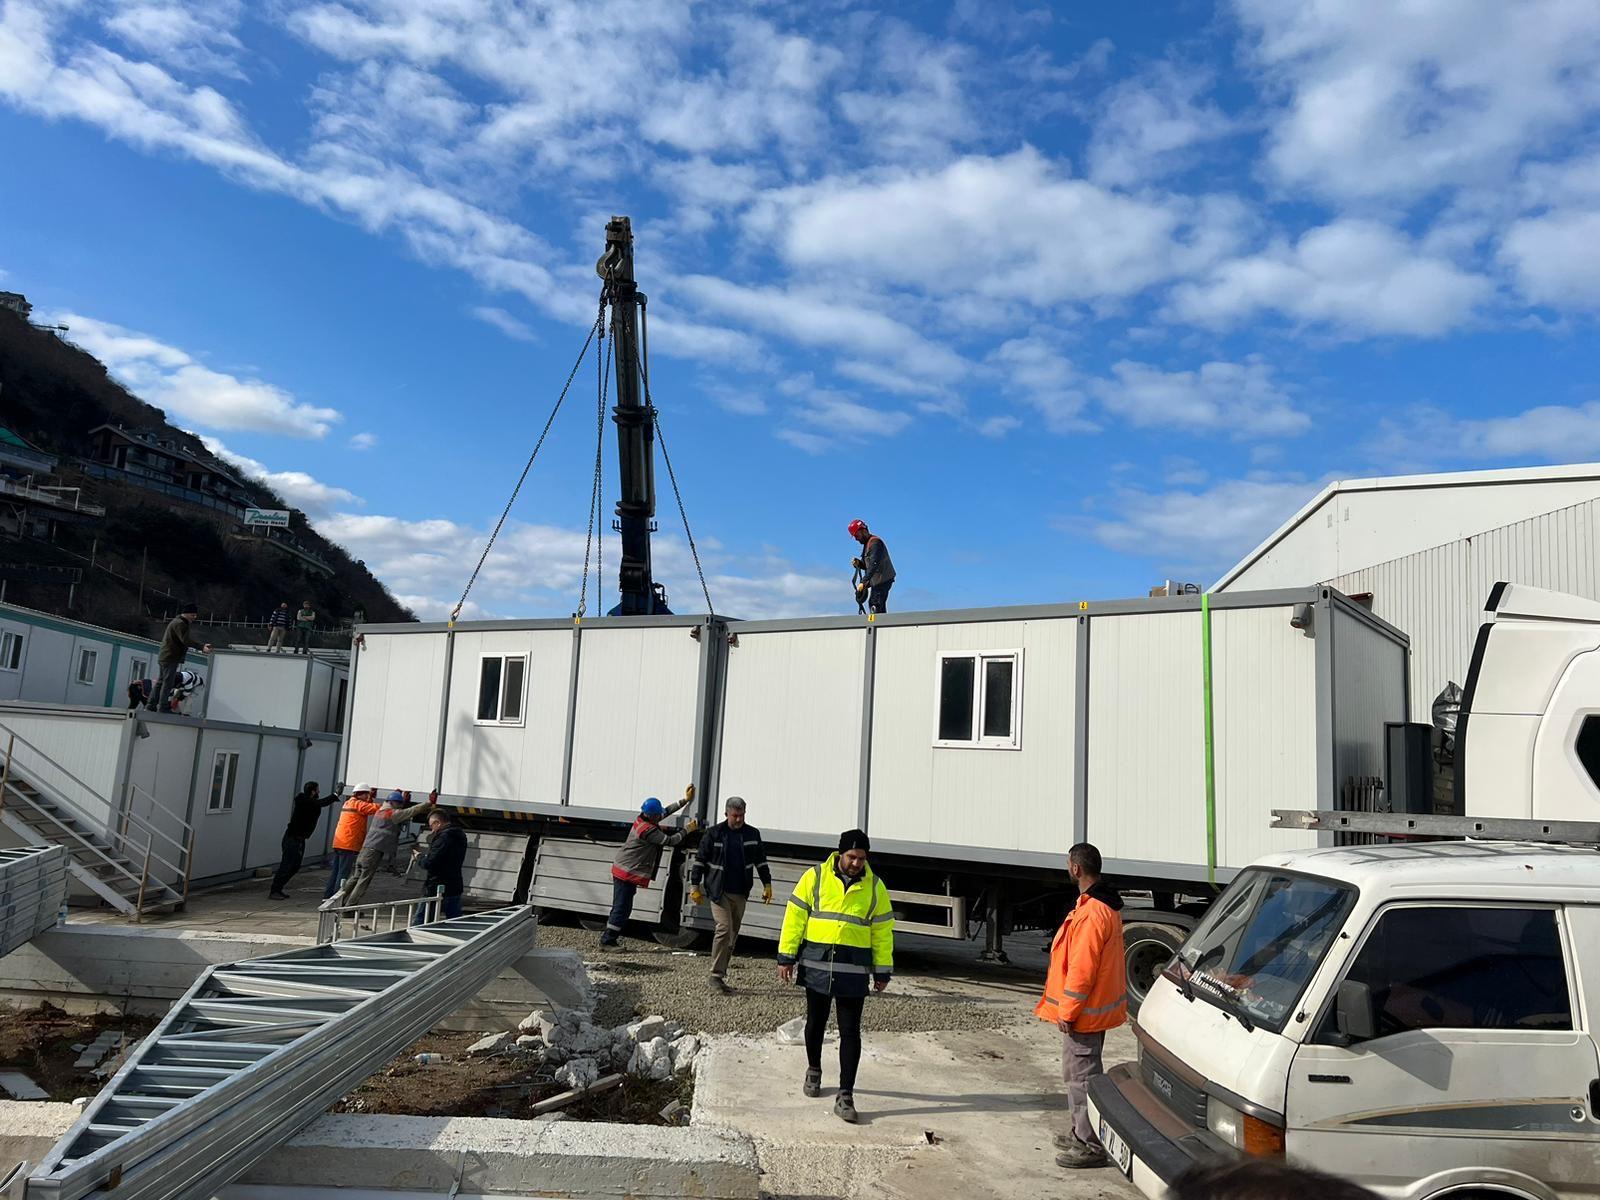 TÜRKONFED has provided nearly 400 shipping containers like this one to provide mid-term housing solutions for earthquake victims.